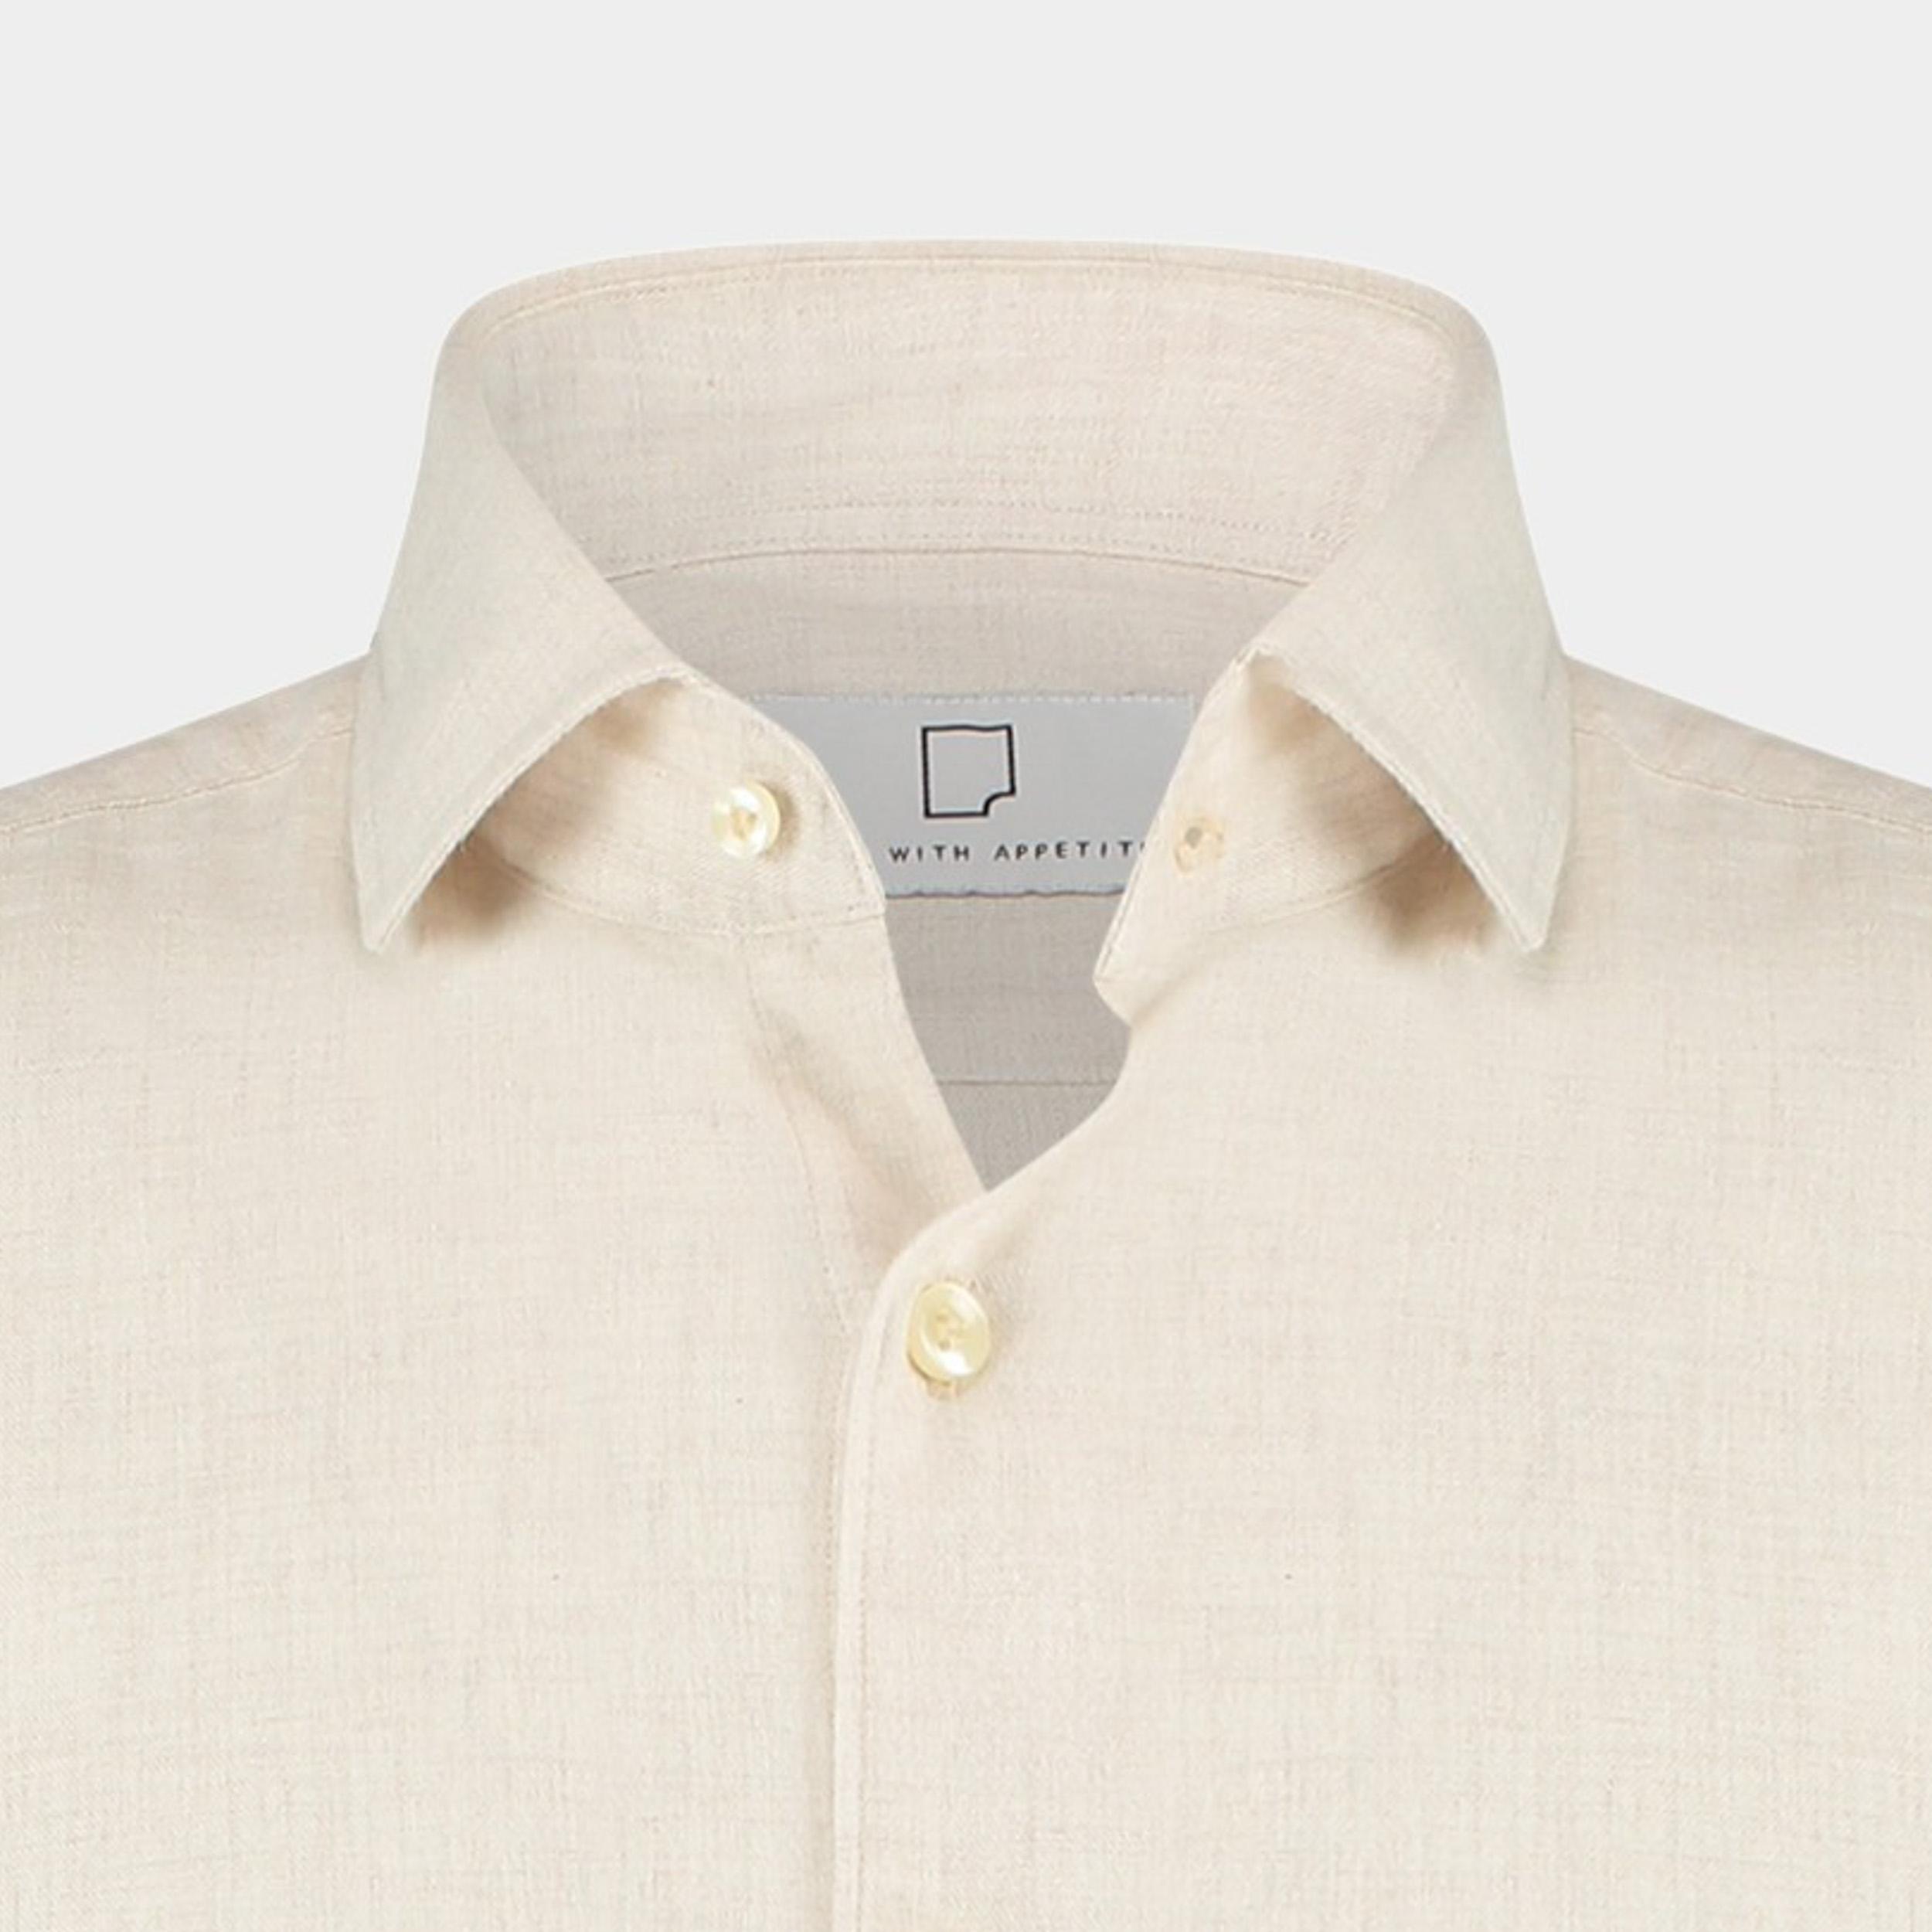 Born With Appetite Casual hemd lange mouw Beige Flake Shirt Flanel Stretch Ws 23307FL31/112 silver